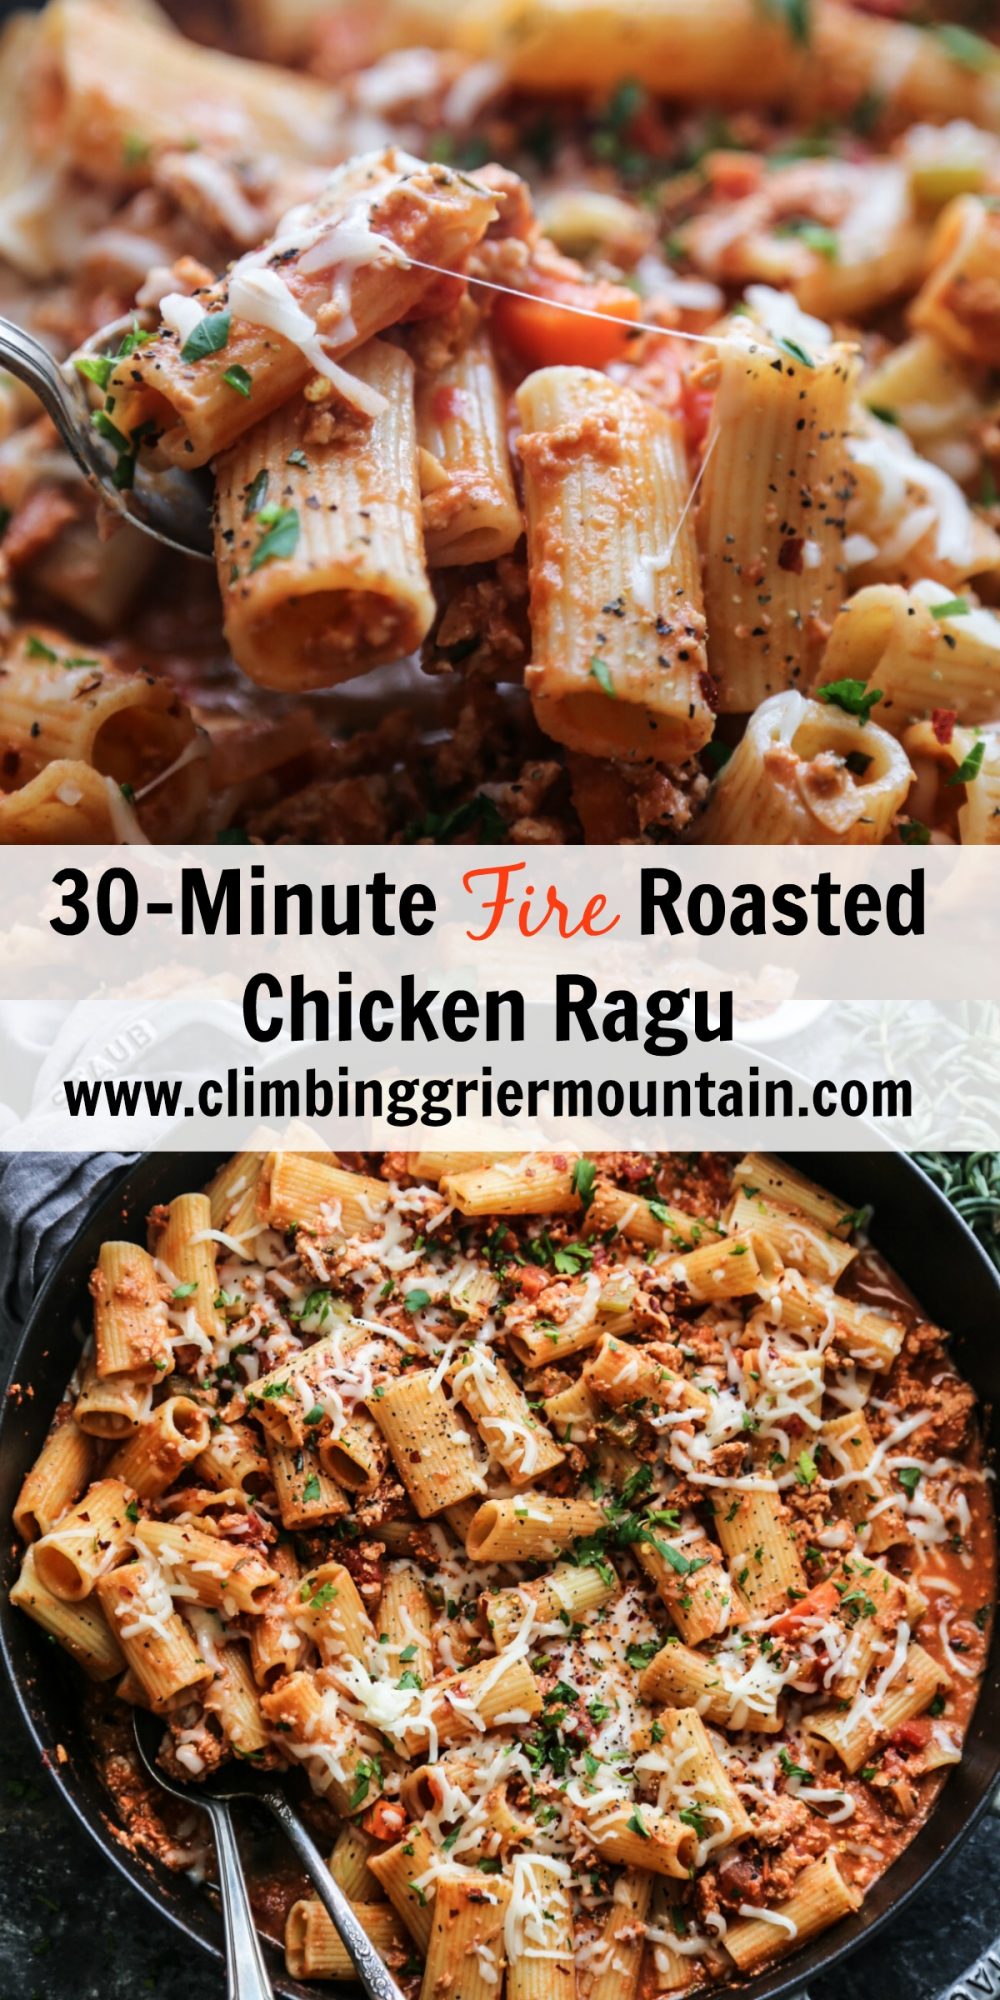 30-Minute Fire Roasted Chicken Ragu - The Curious Plate